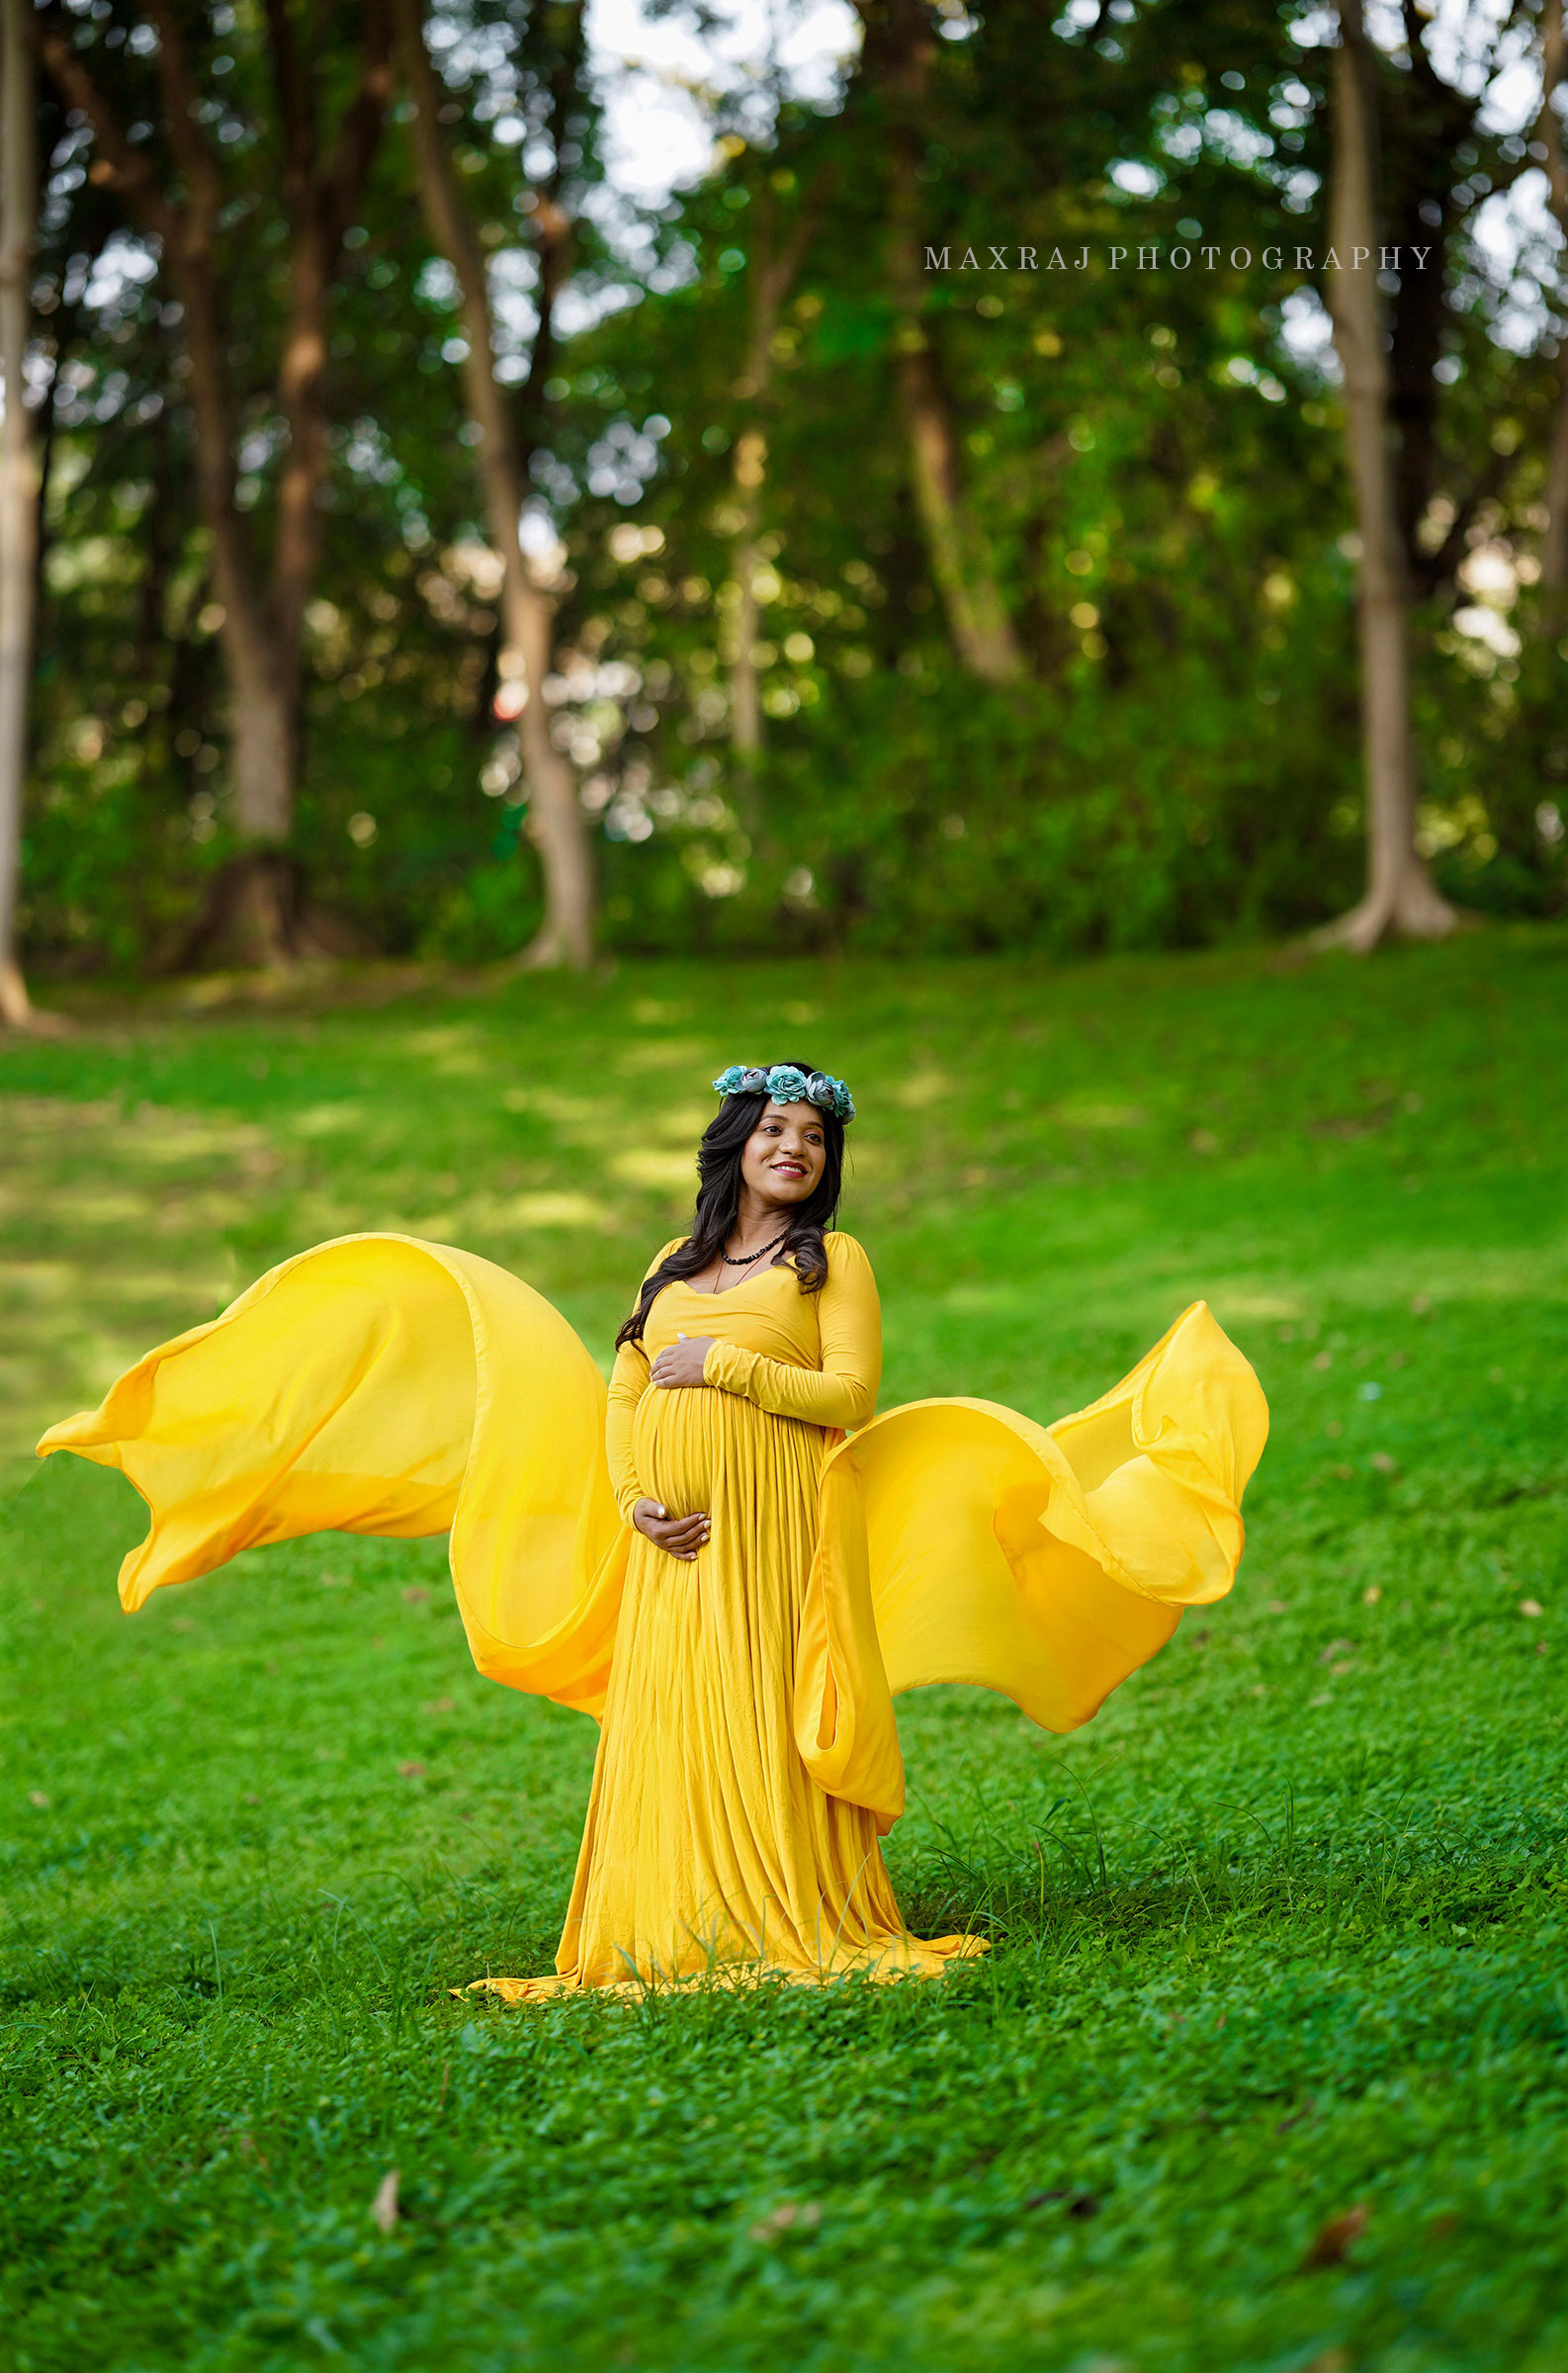 maternity photographer in pune, maternity photoshoot poses, maternity photoshoot ideas, maternity photoshoot in yellow gown